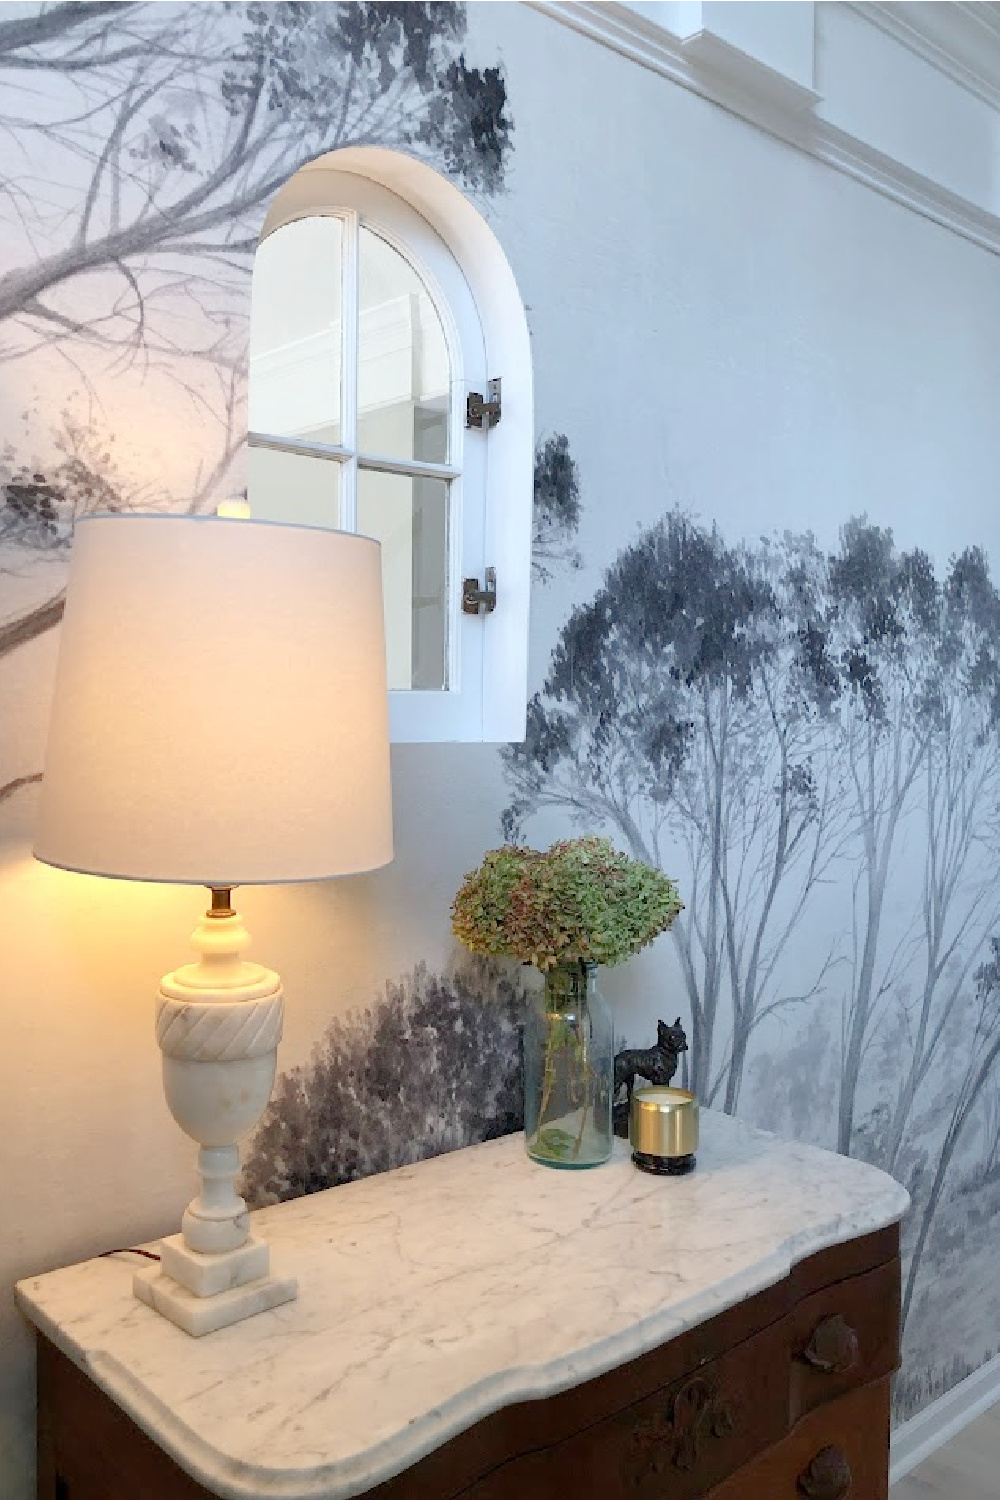 Tree mural wallpaper (Photowall) in our entry with interior arched window and marble topped chest - Hello Lovely Studio.